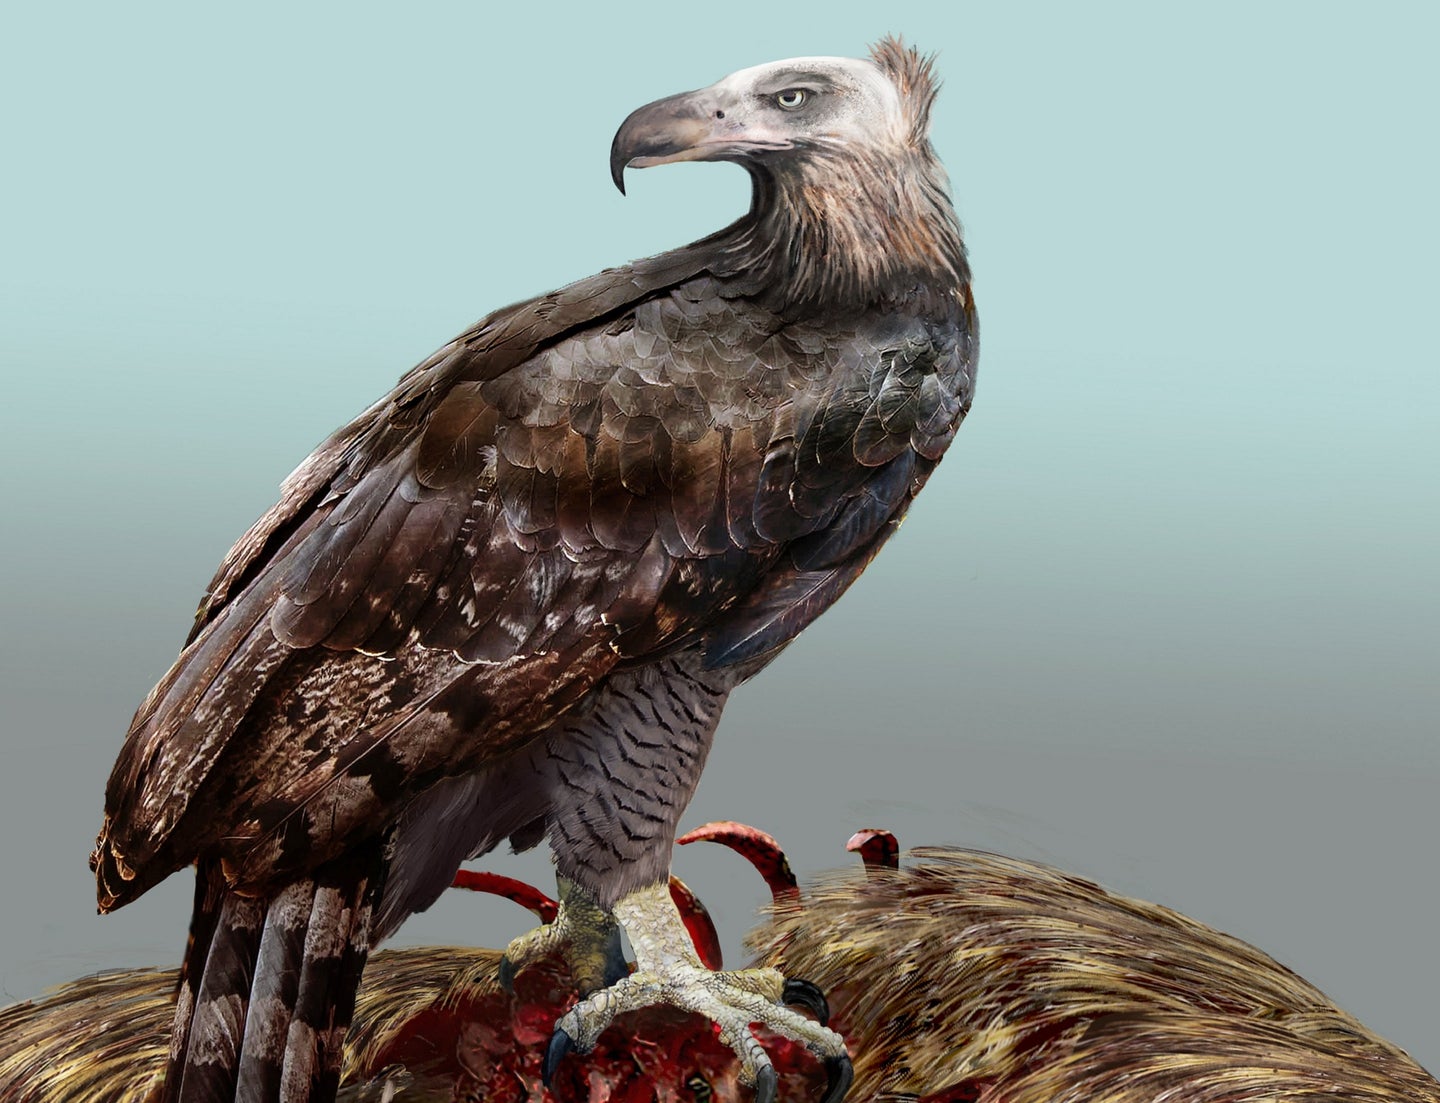 Brown and white extinct Haast's eagle with talons sunk into a furry carcass